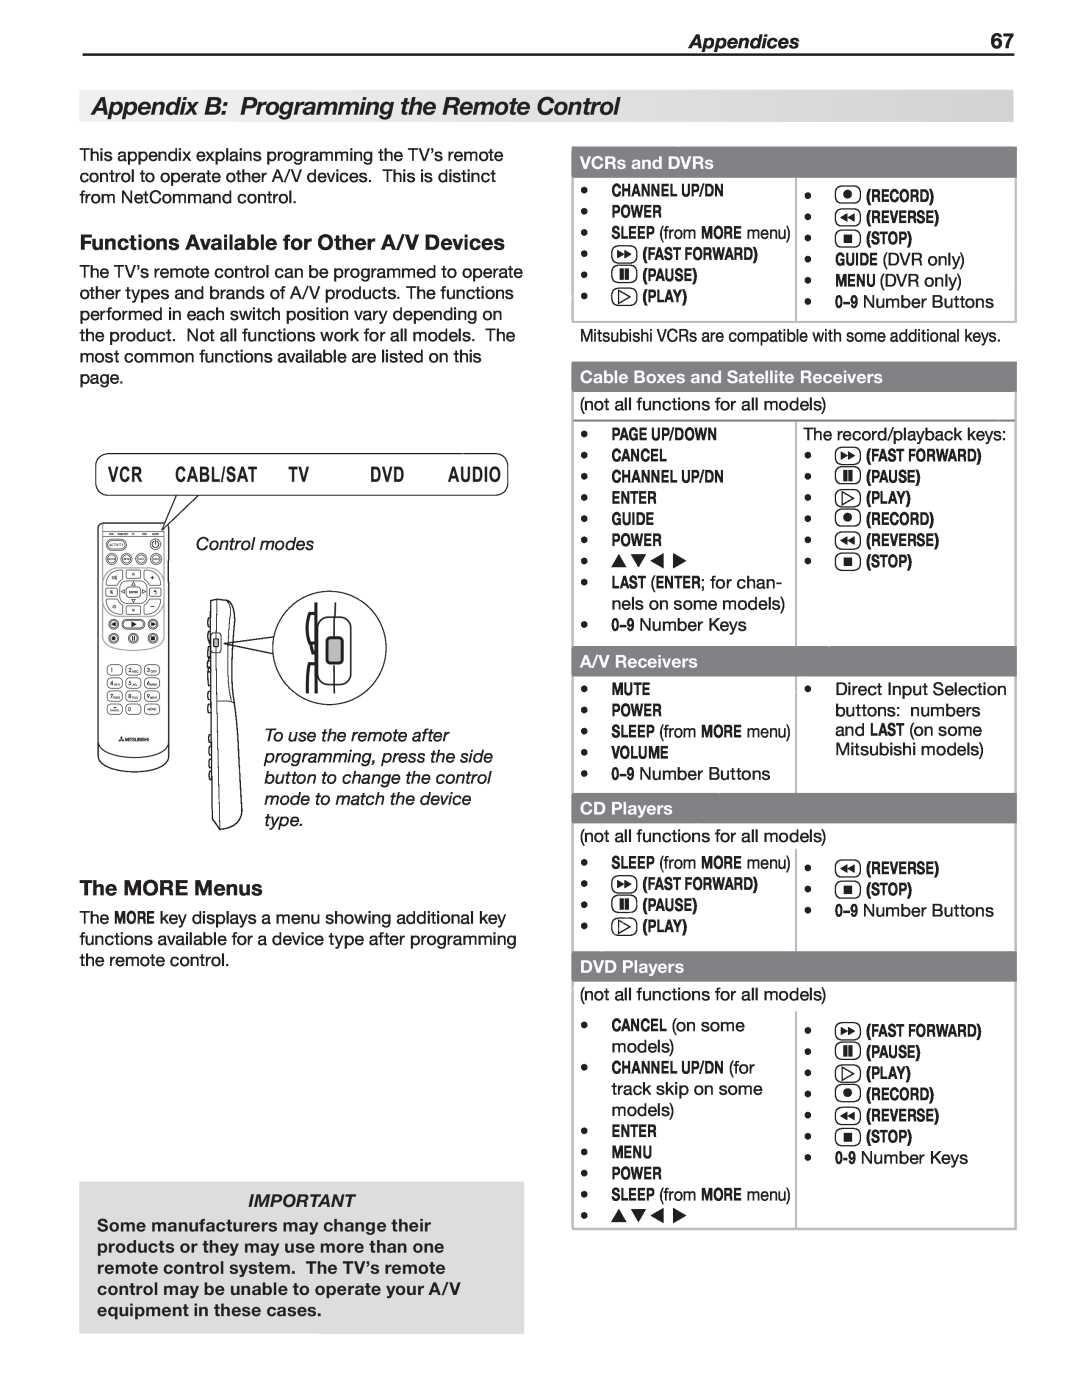 Mitsubishi Electronics LT-46151 manual Appendix B Programming the Remote Control, Functions Available for Other A/V Devices 